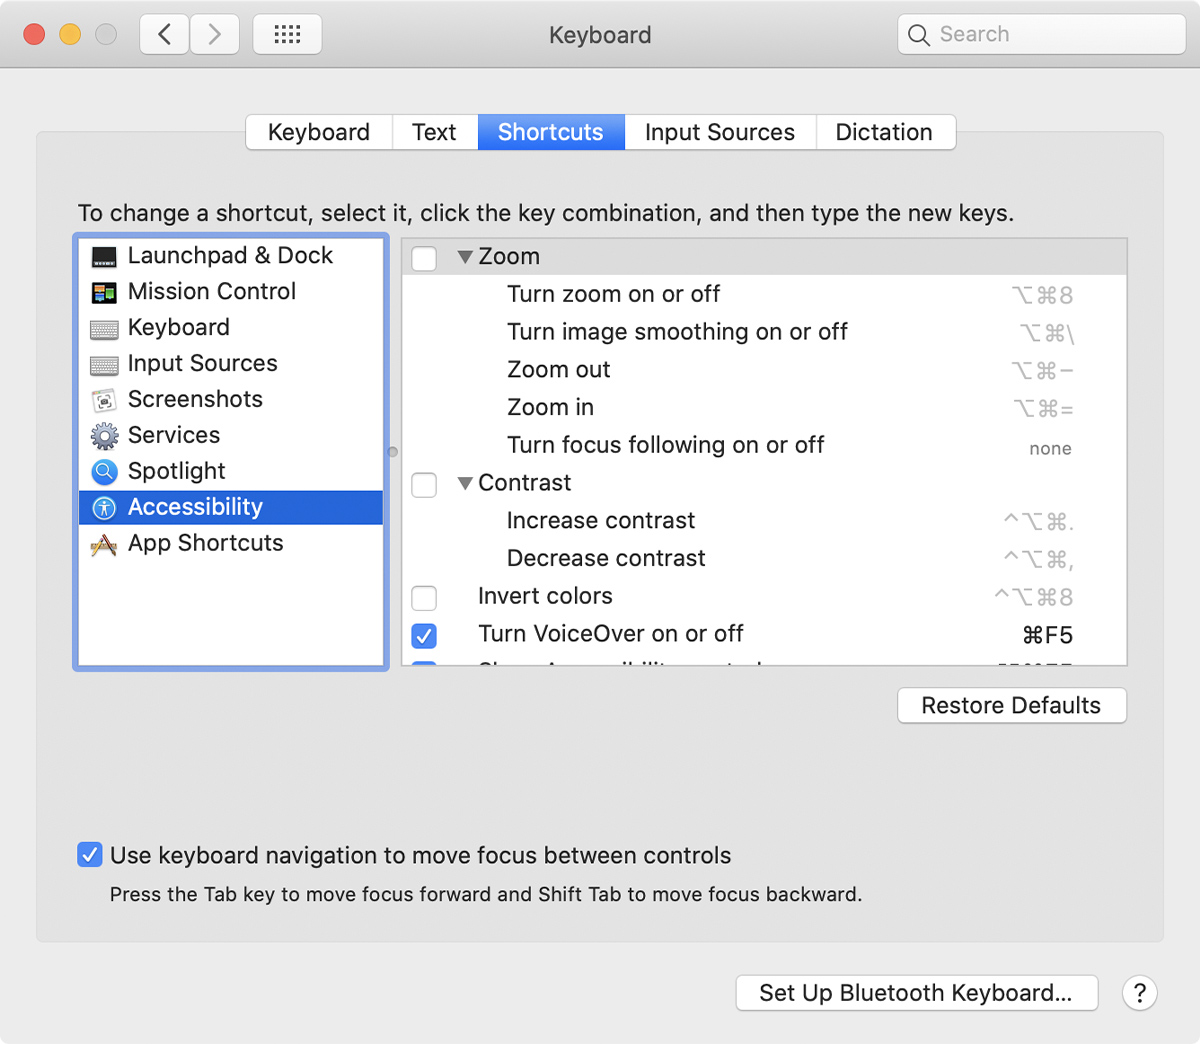 hpw tp turn on the menu for mac that lets you choose accents on letters